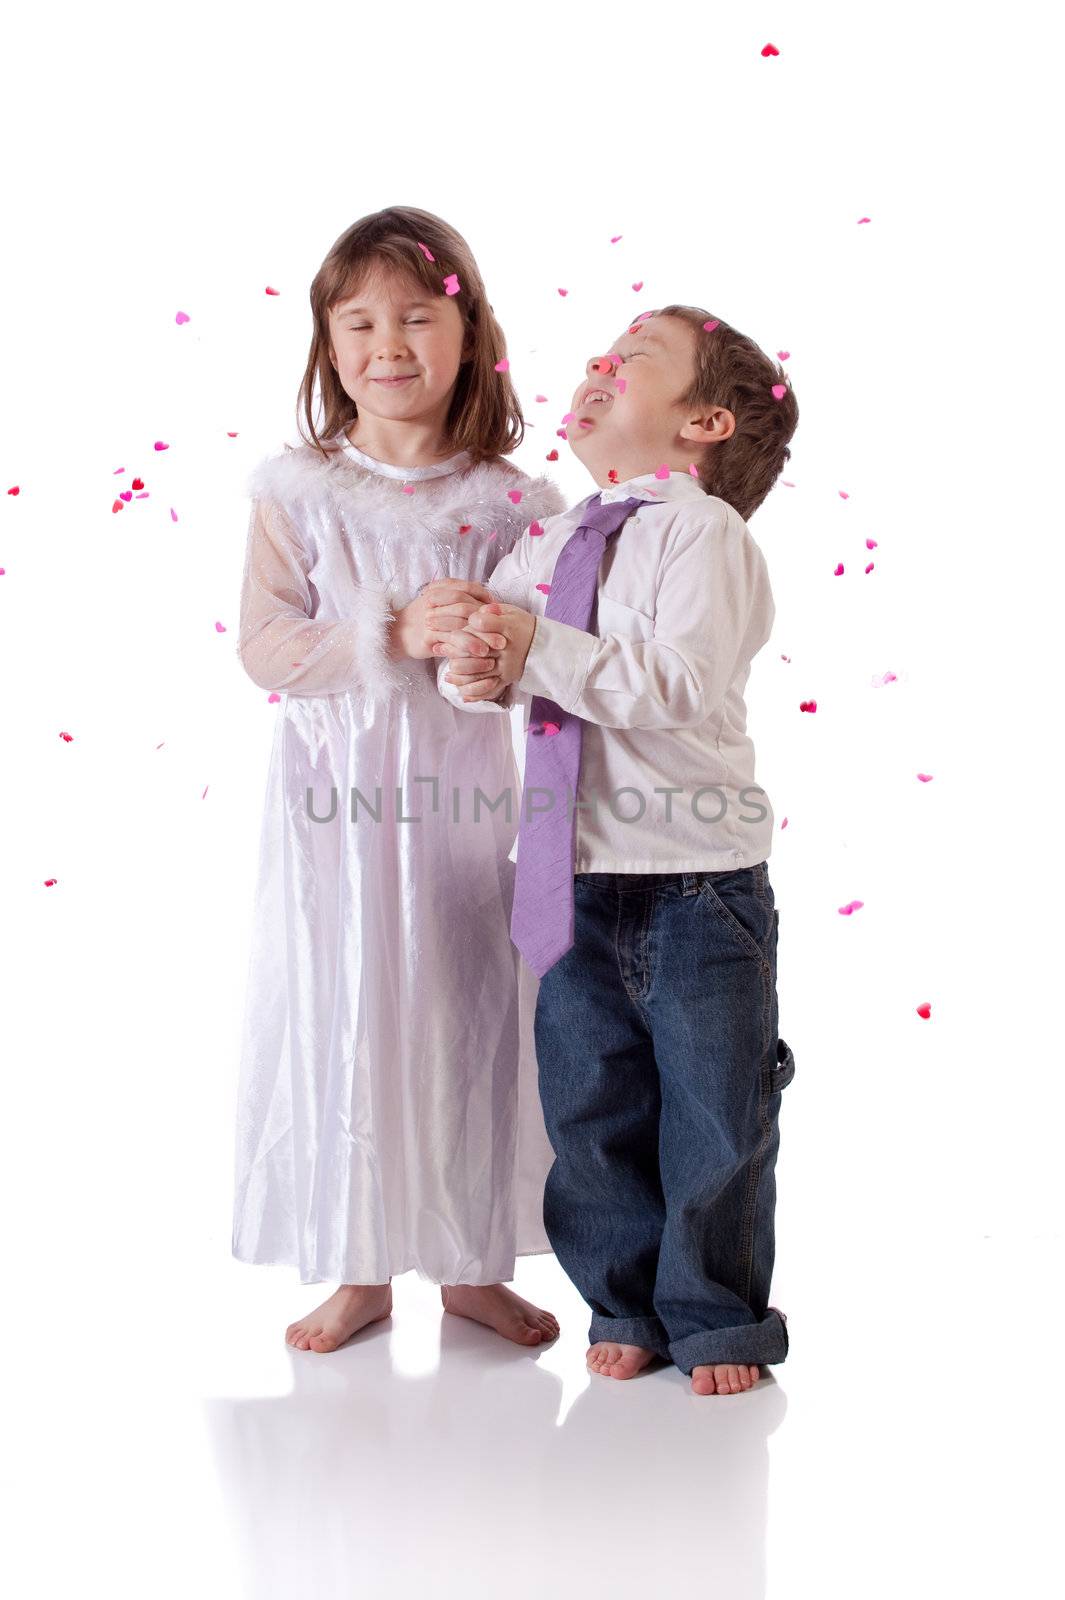 Cute little boy and girl wishing to get married